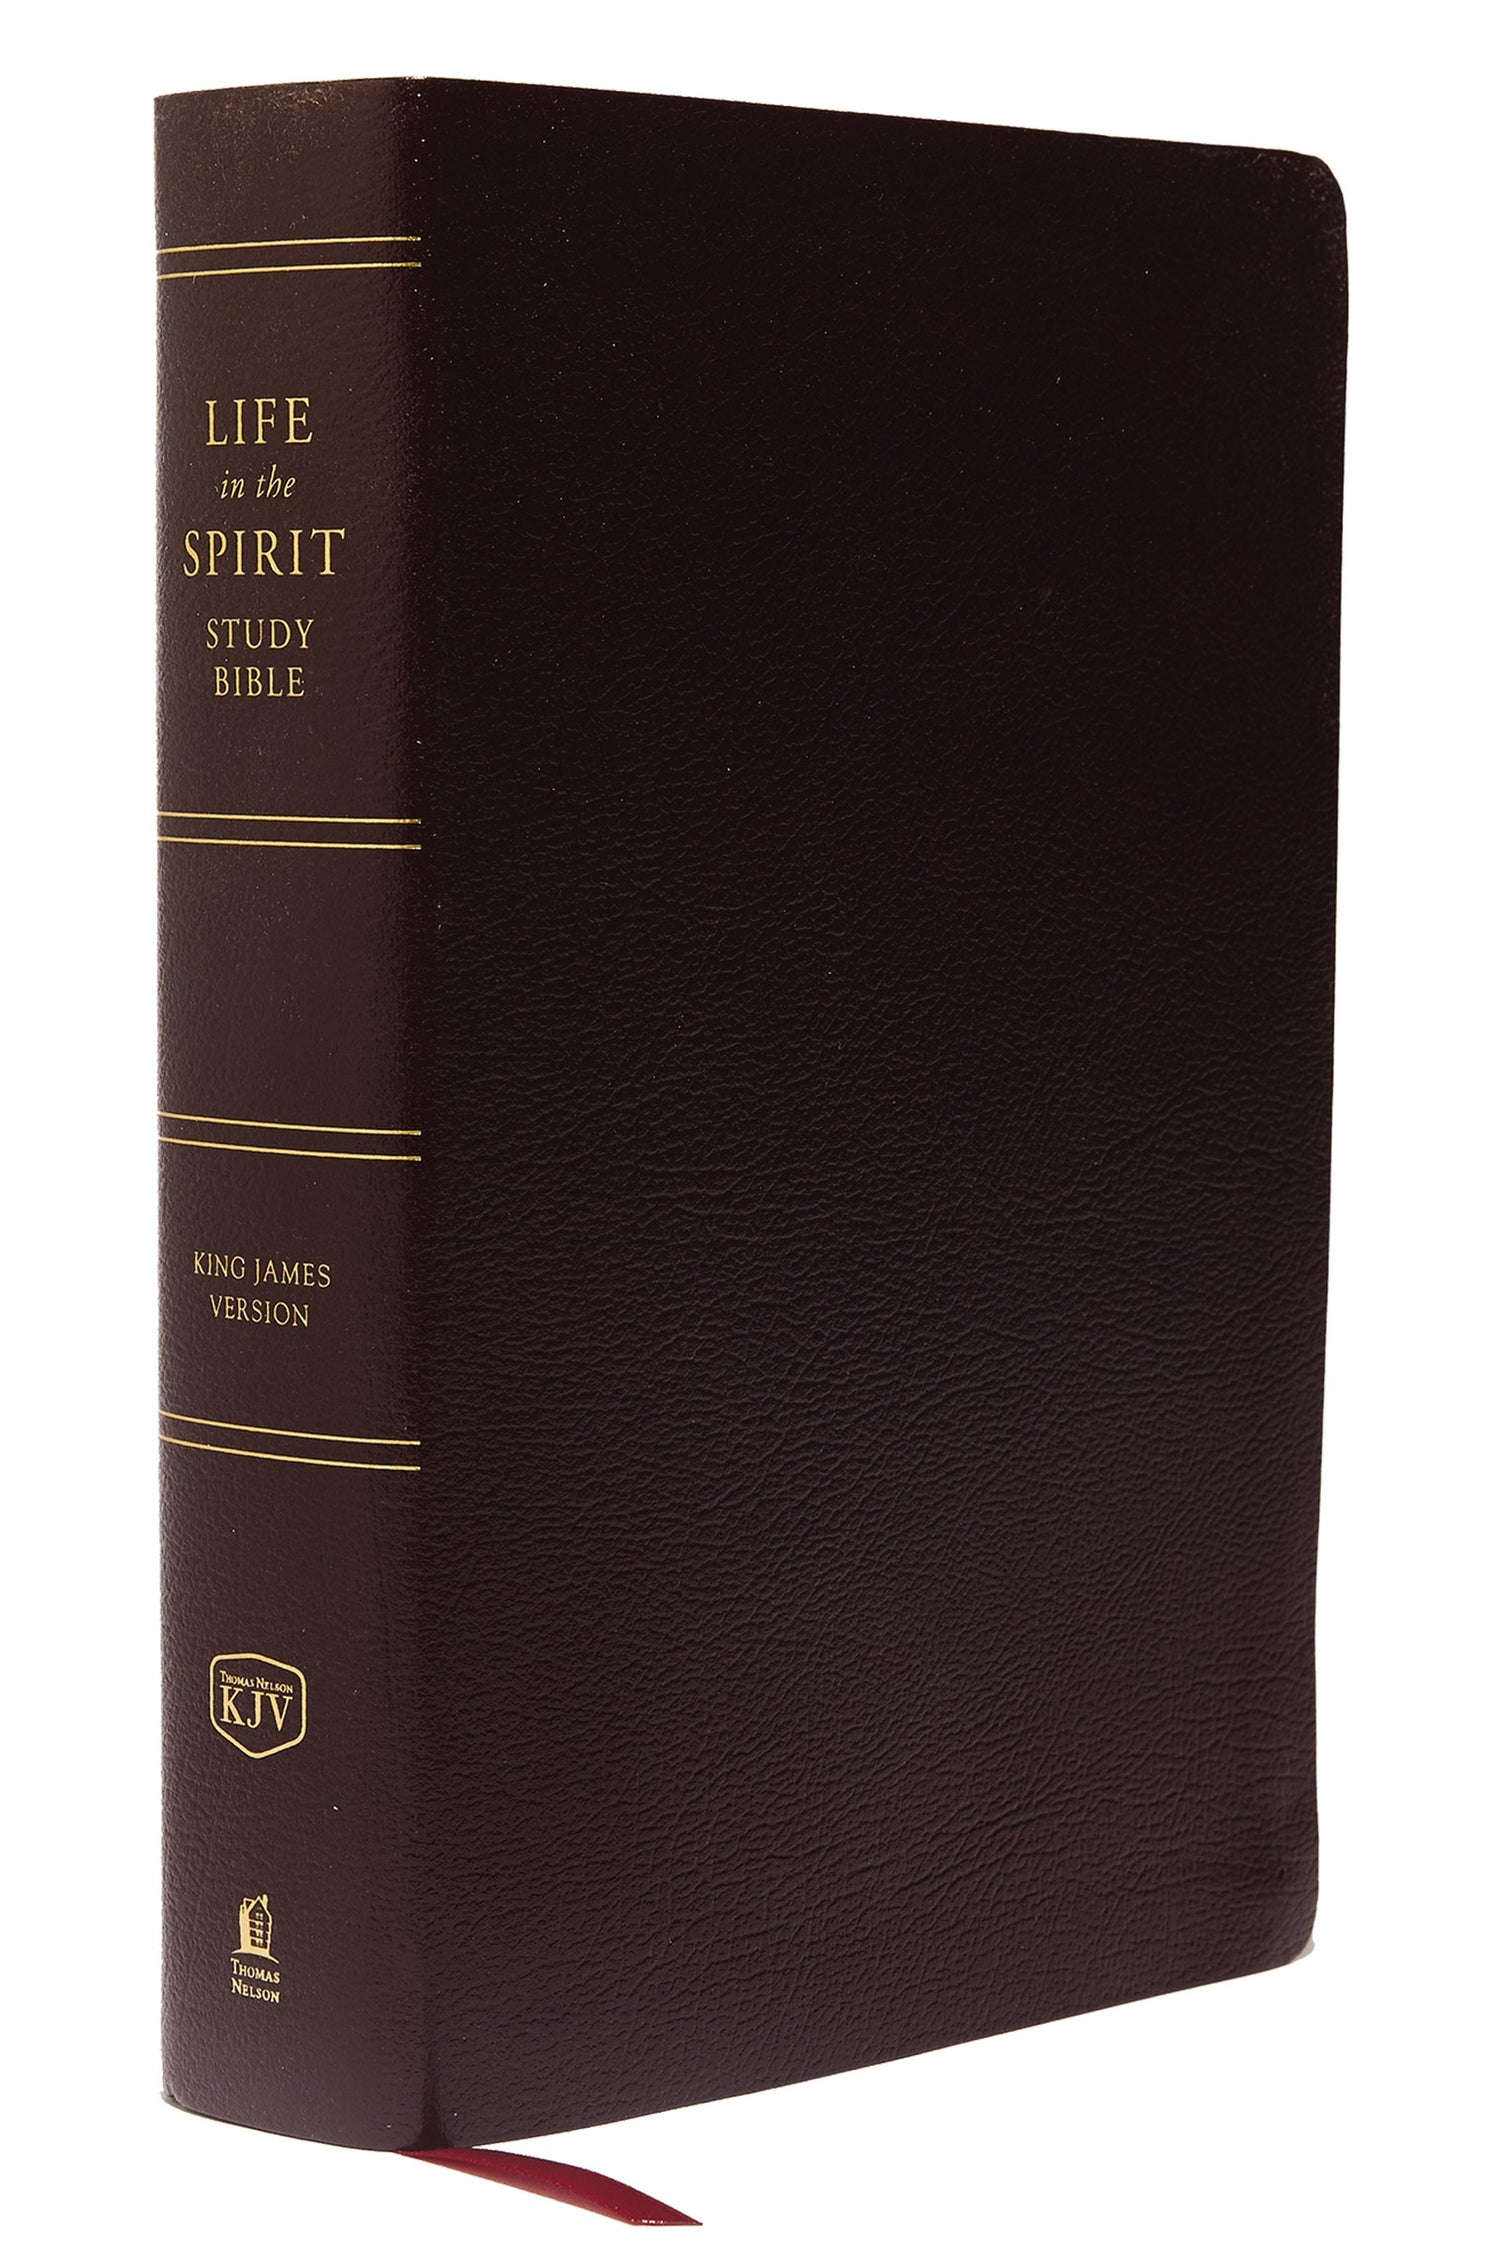 Seed of Abraham Christian Bookstore - (In)Courage - KJV Life In The Spirit Study Bible-Burgundy Bonded Leather Indexed